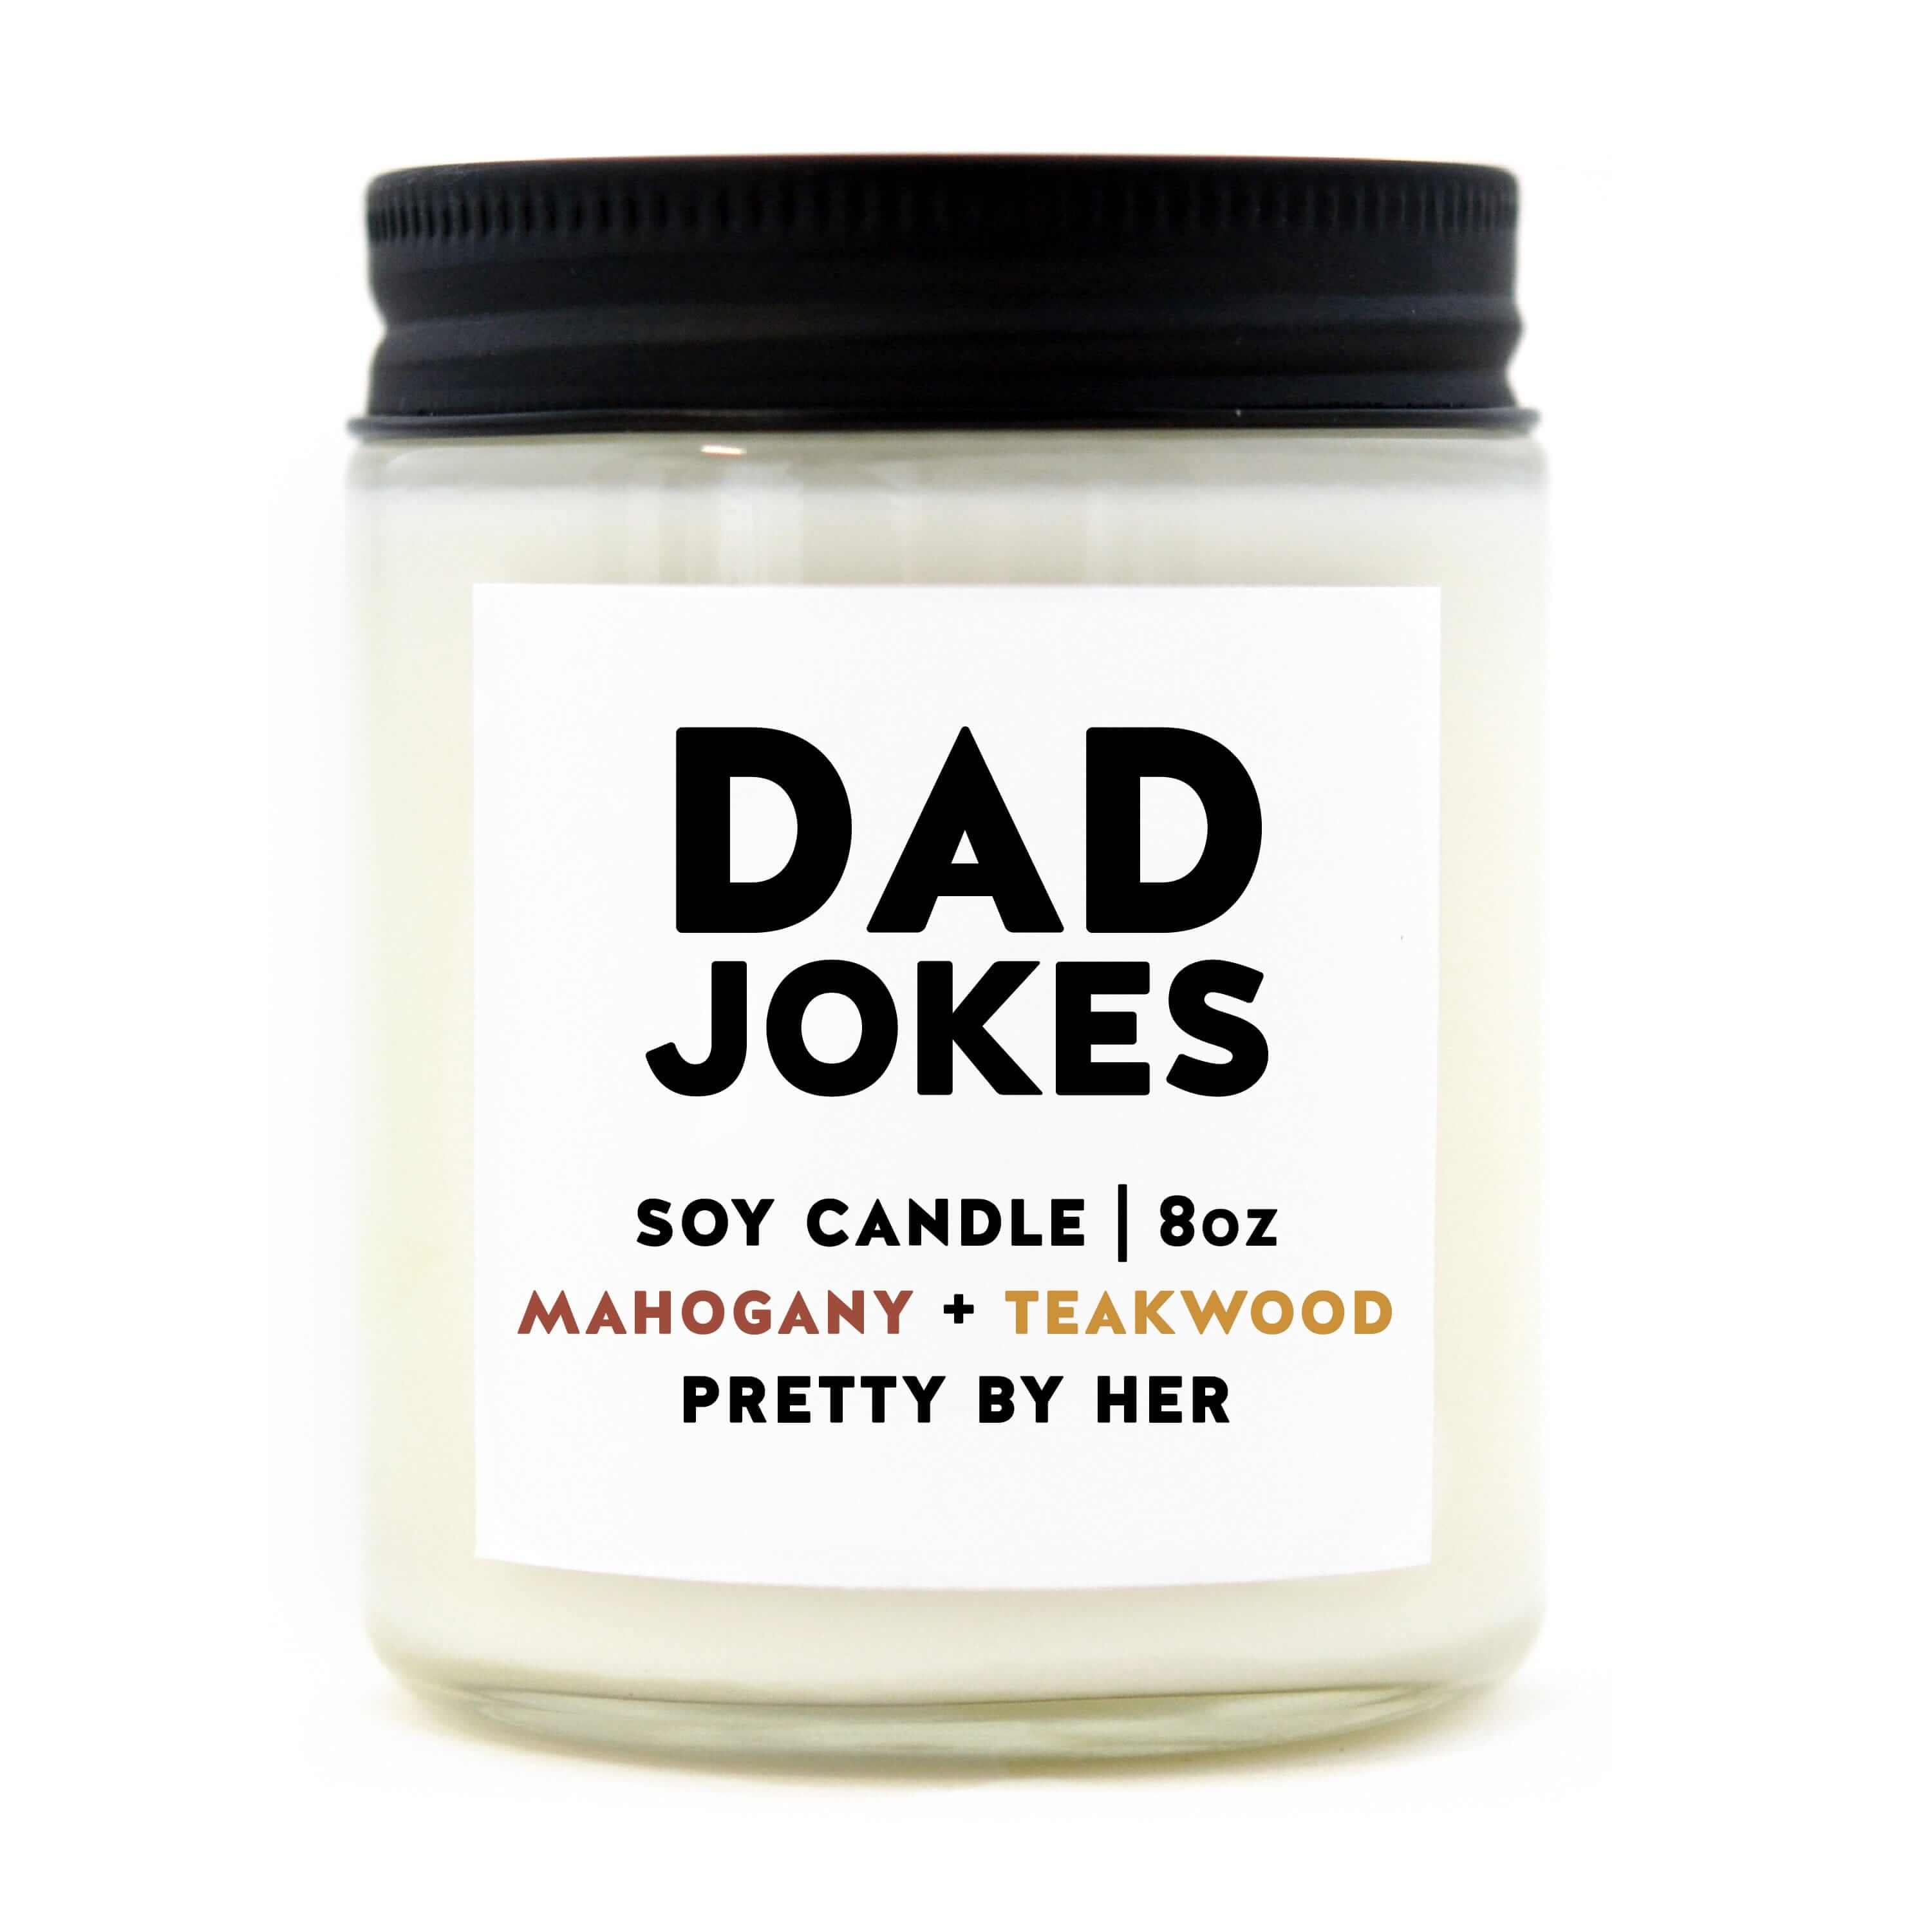 PRETTY BY HER Candles PRETTY BY HER, DAD JOKES, Soy Candle, made in Canada